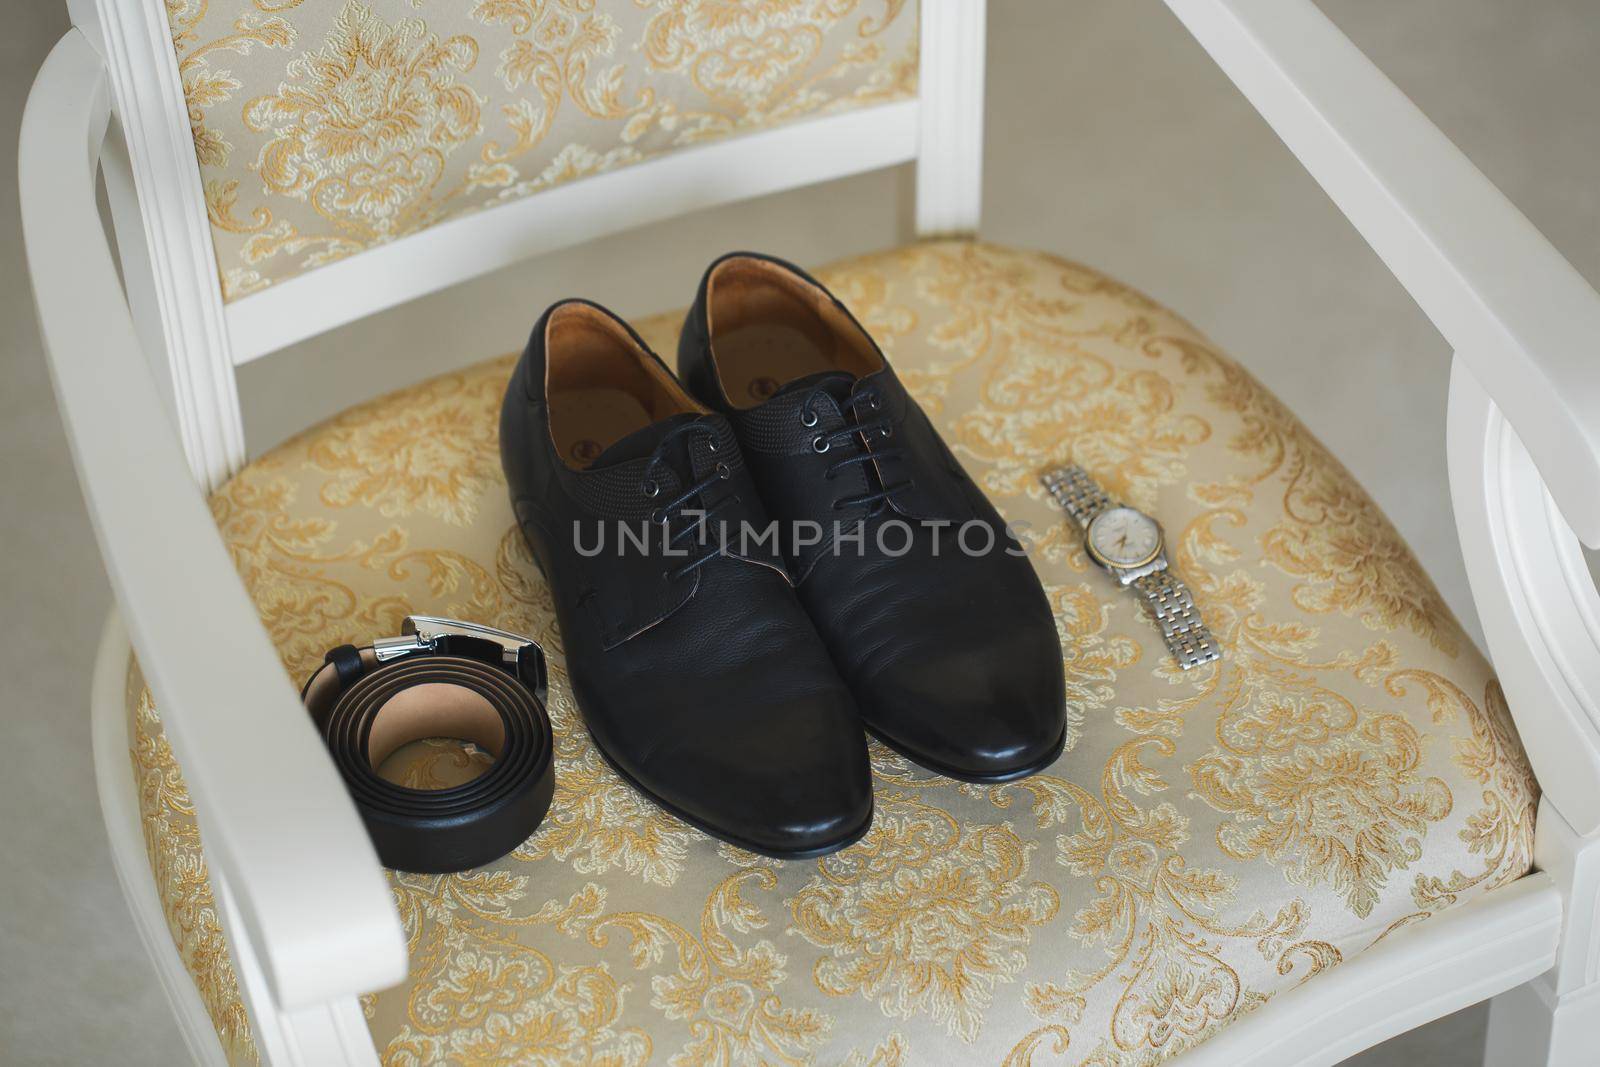 Accessories for the groom. Wedding shoes on a chair. by StudioPeace